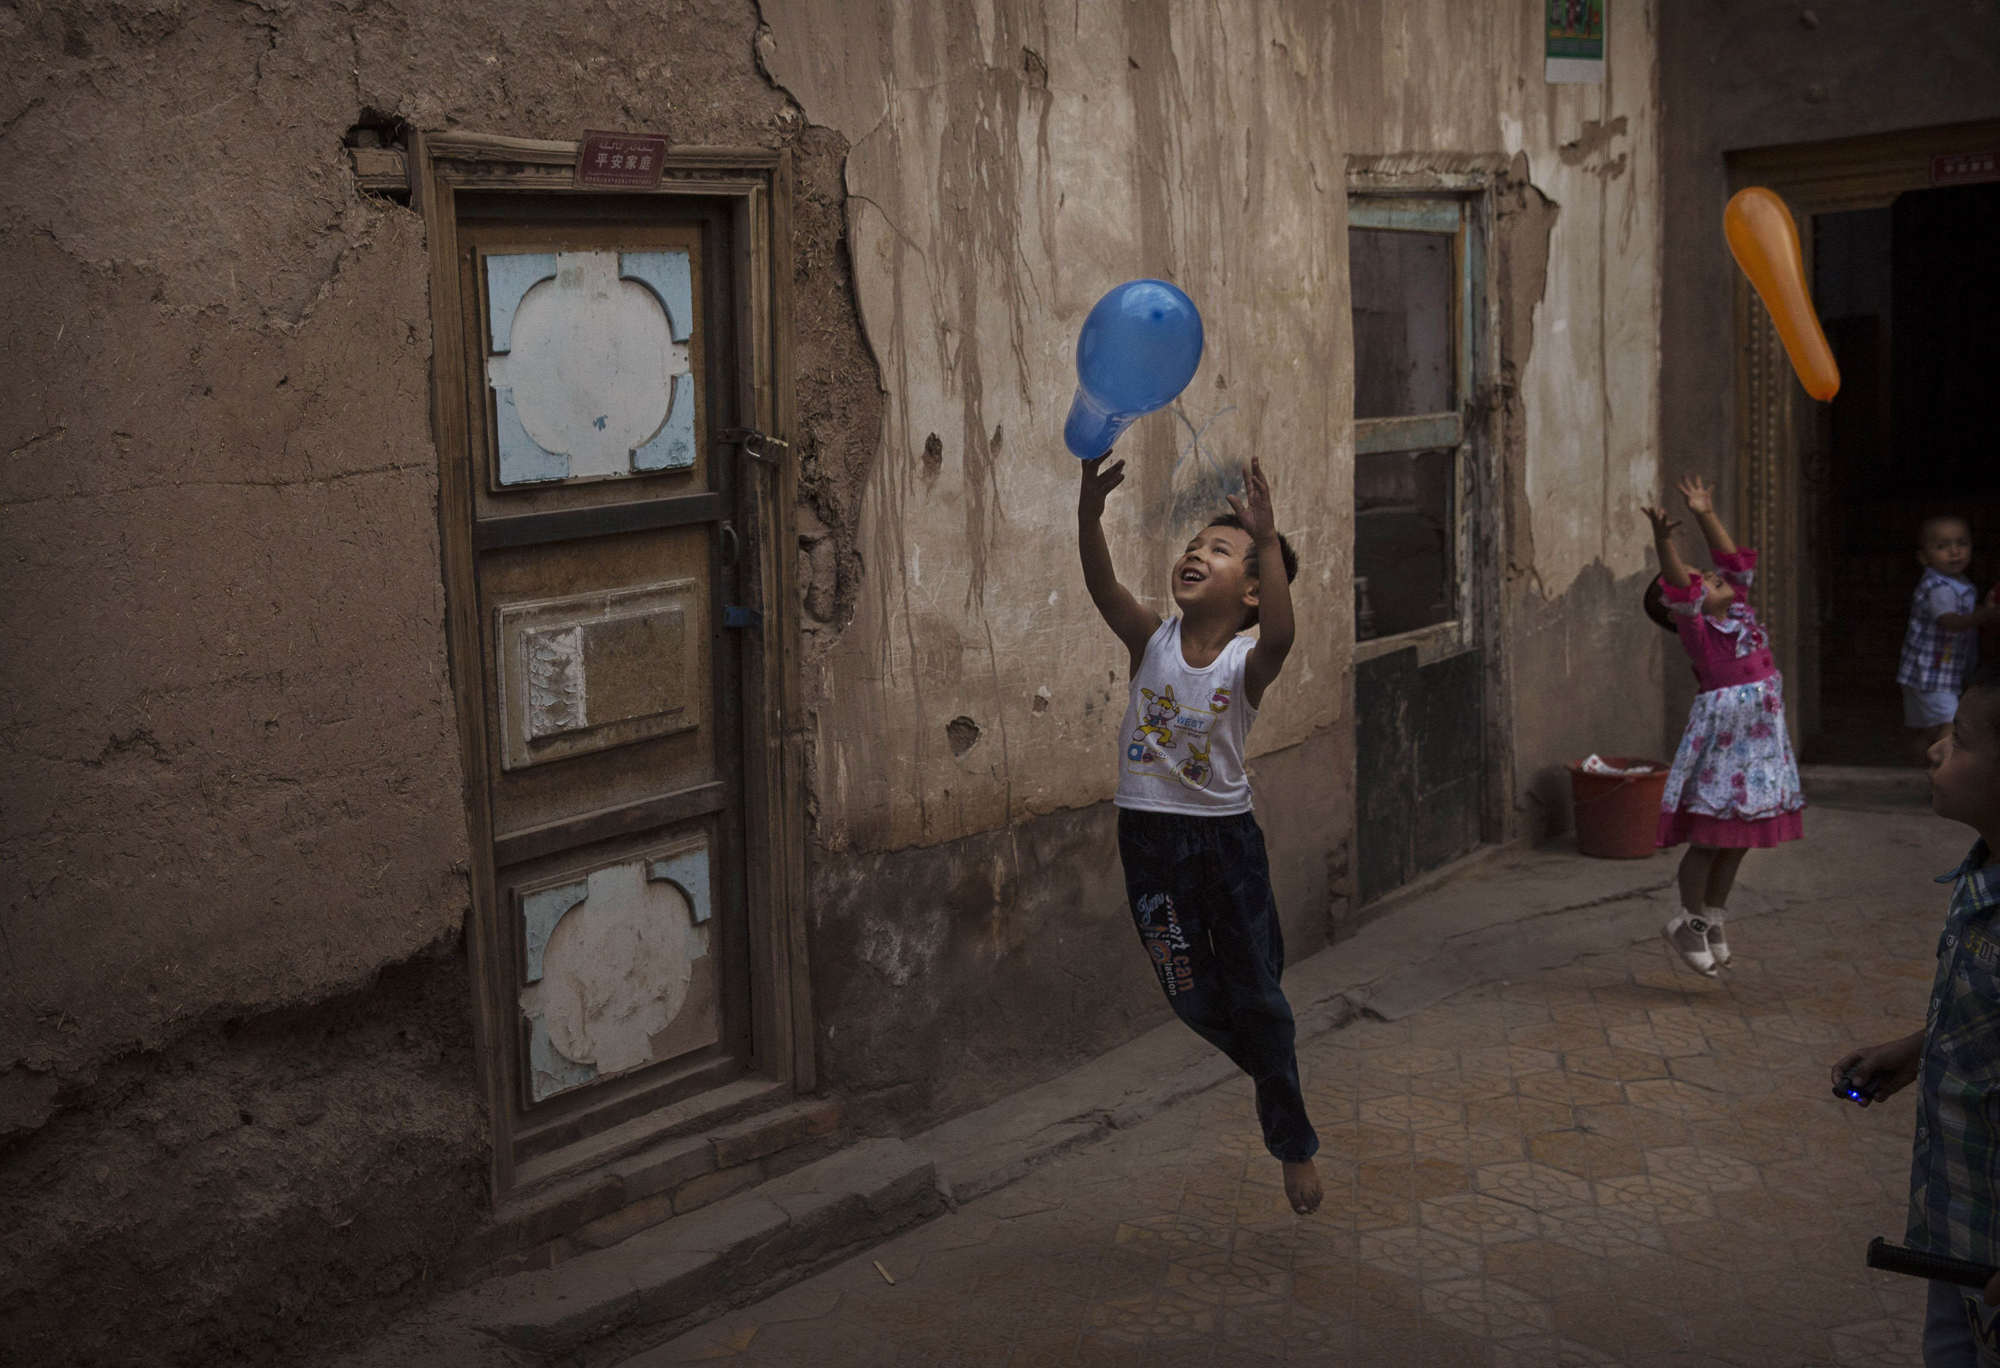 Uighur children play with balloons on the Eid holiday on July 29, 2014 in alleyway in old Kashgar.